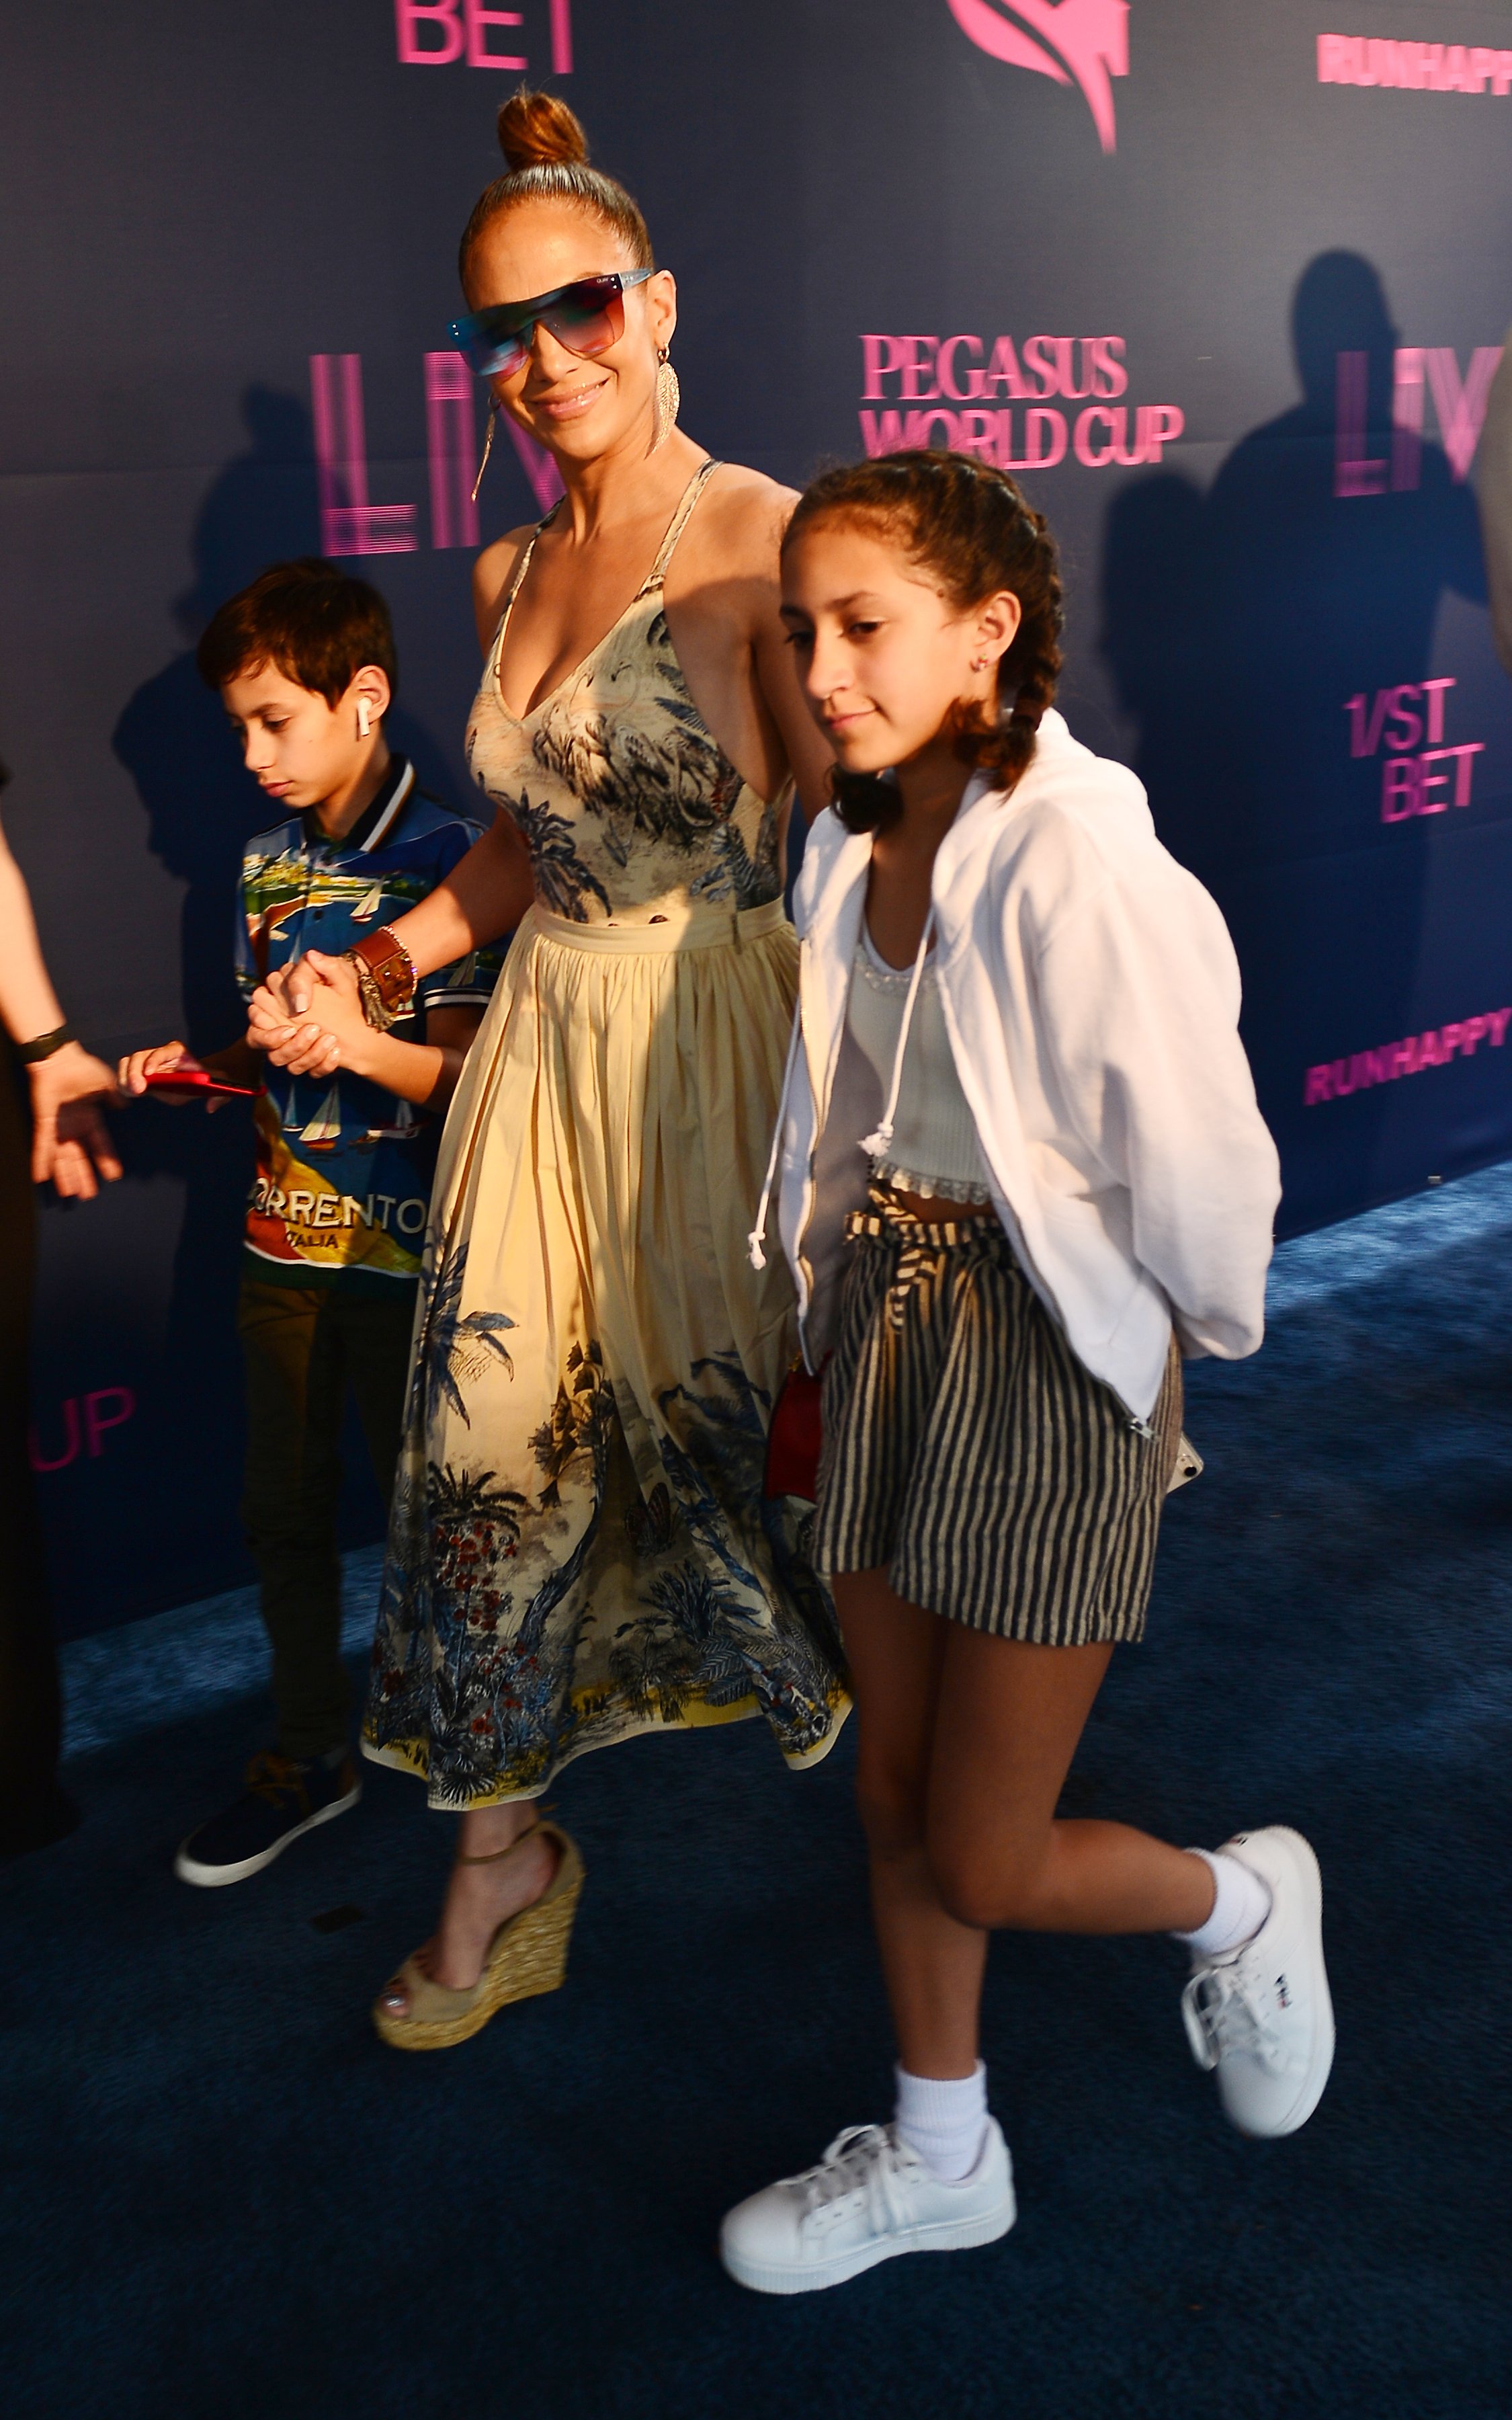 Jennifer Lopez with son Maximilian and daughter Emme attending the Pegasus World Cup Championship in Hallandale Beach, Florida on January 25, 2020 | Photo: Getty Images